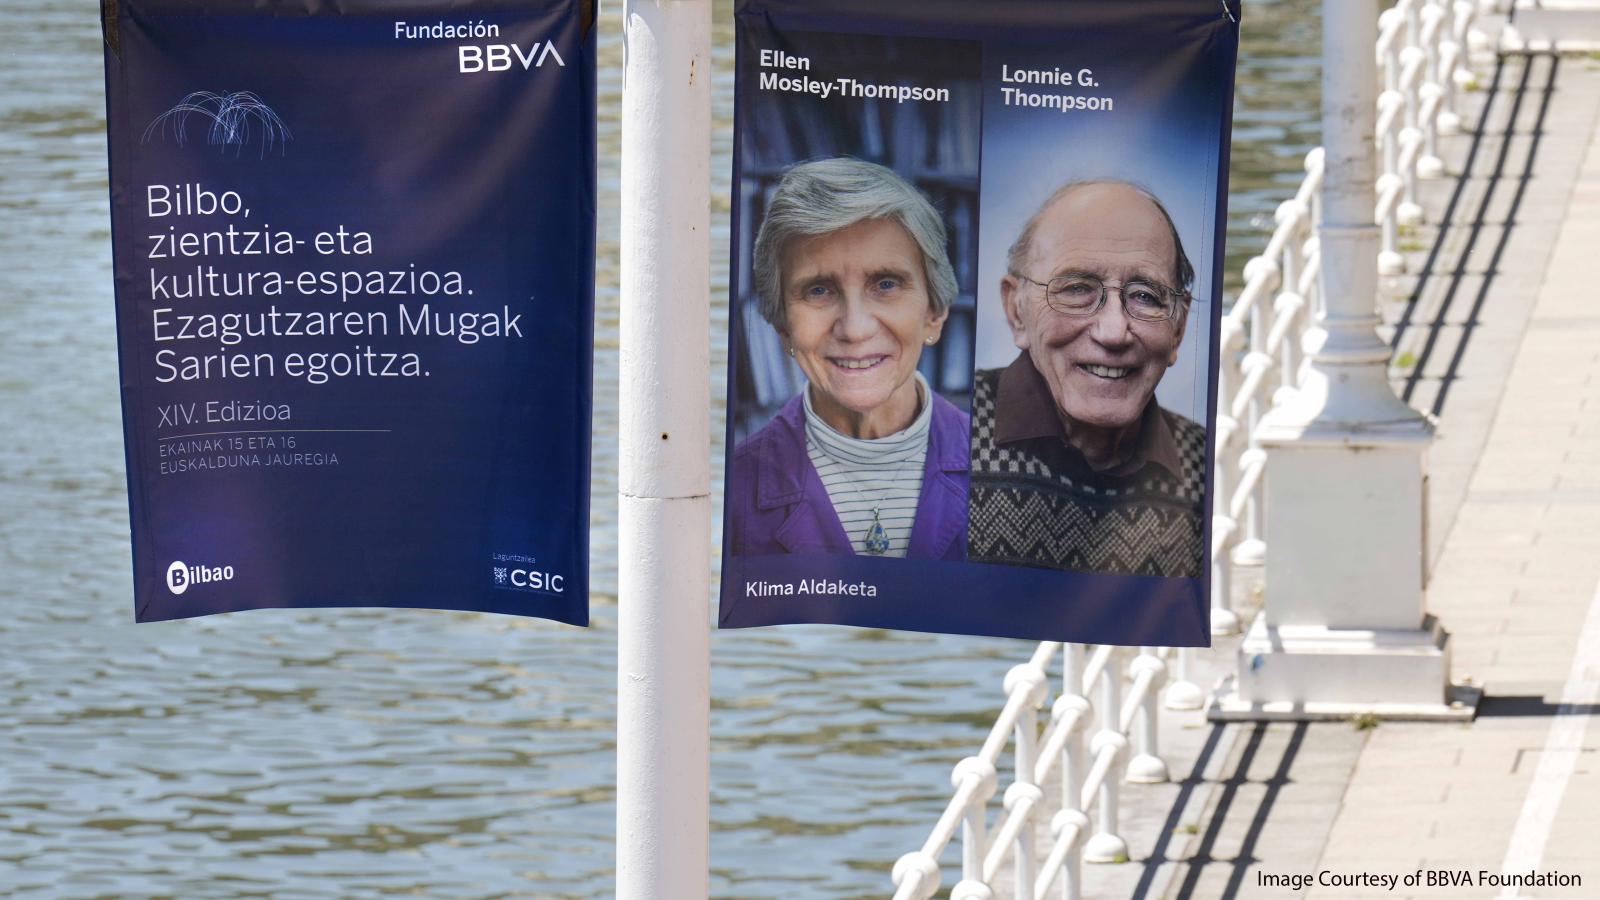 Lonnie Thompson and Ellen Mosely-Thompson images on flags on bridge with water background